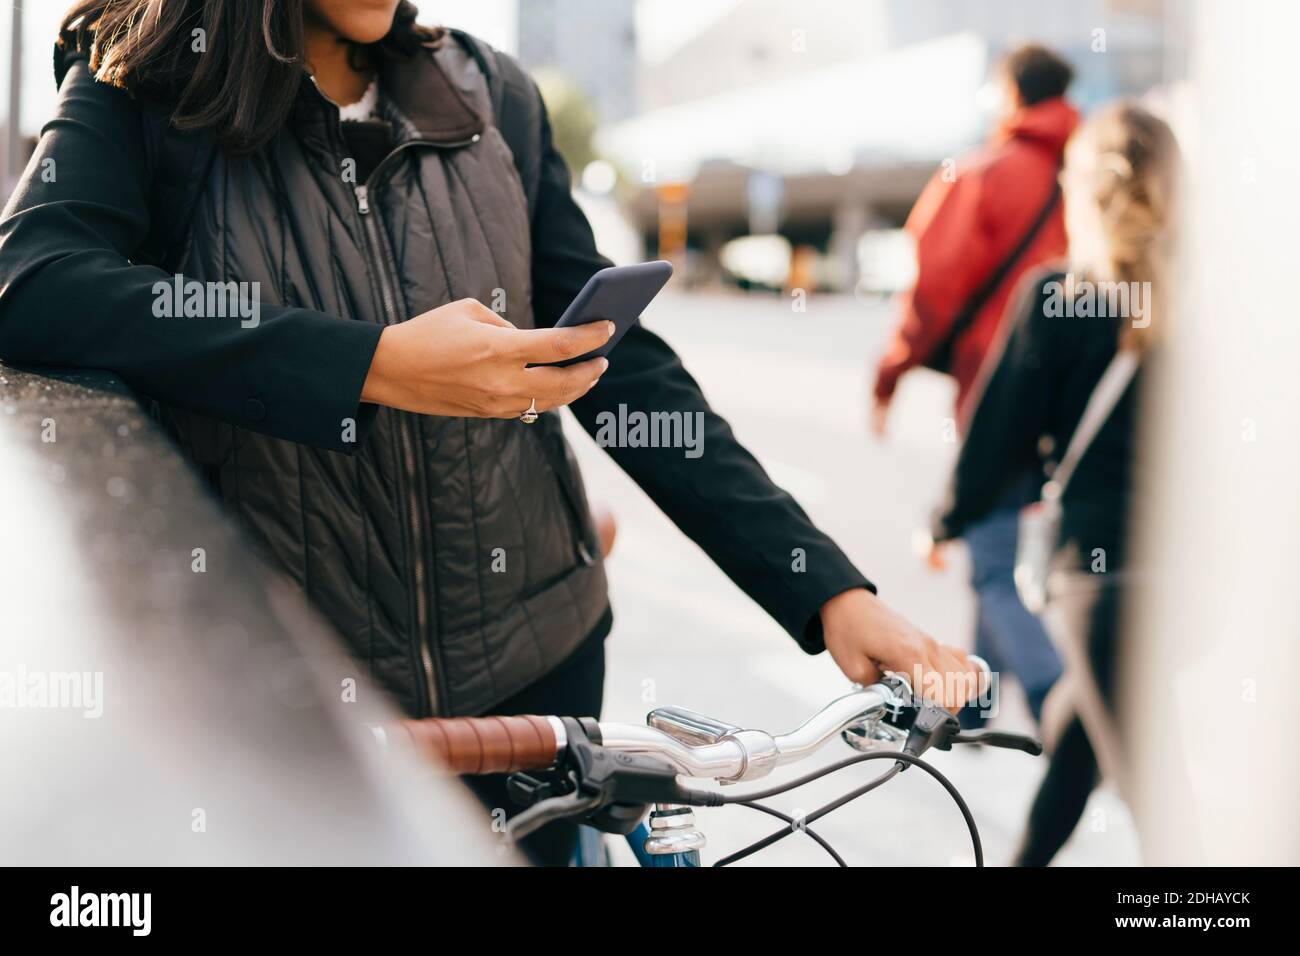 Midsection of businesswoman using smart phone while standing with bicycle in city Stock Photo